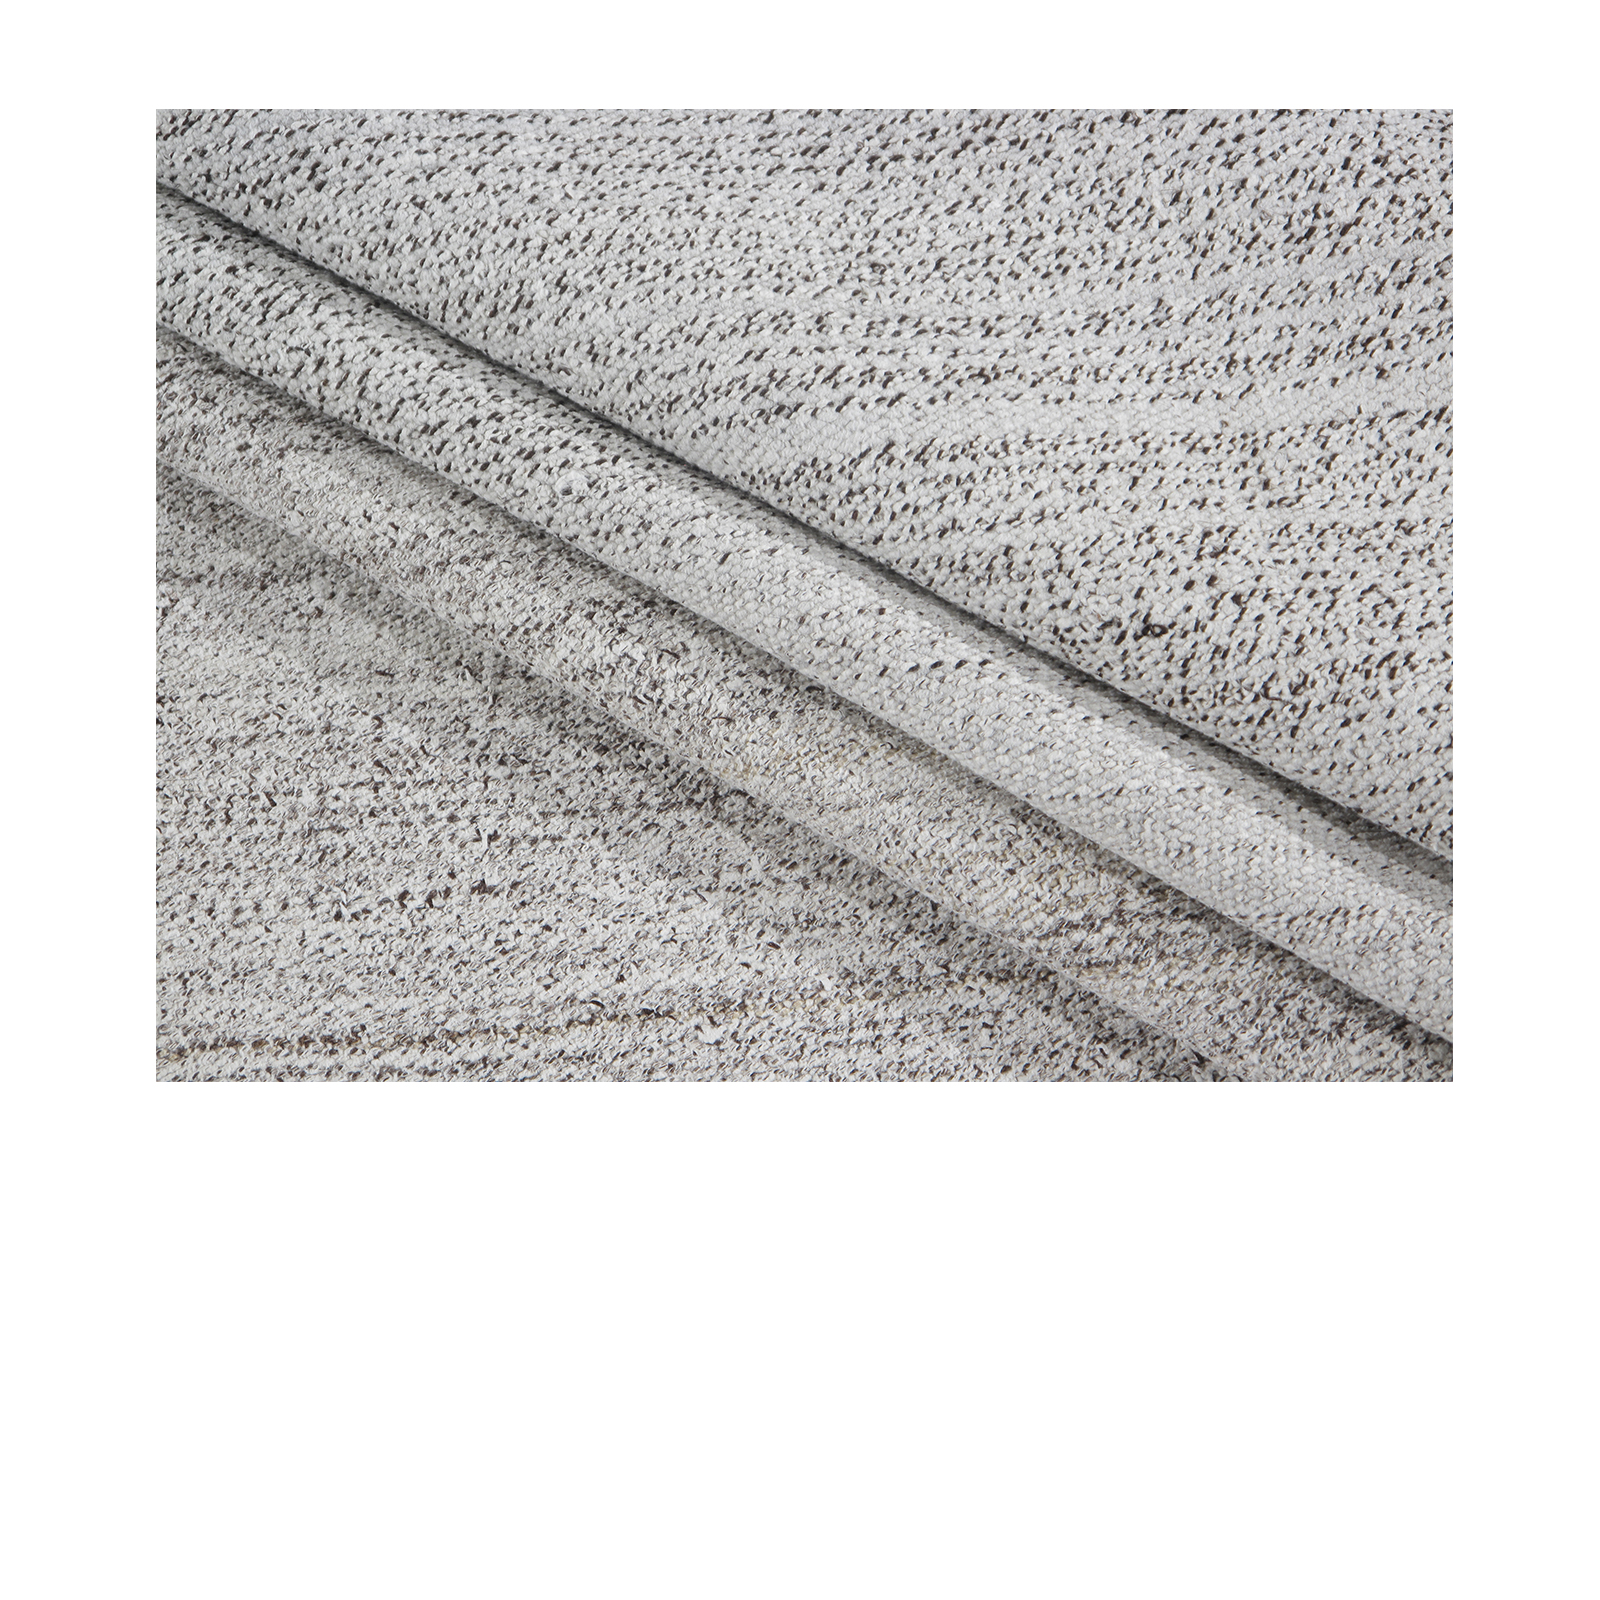 This Vintage flatweave is hand woven and made of wool and cotton.